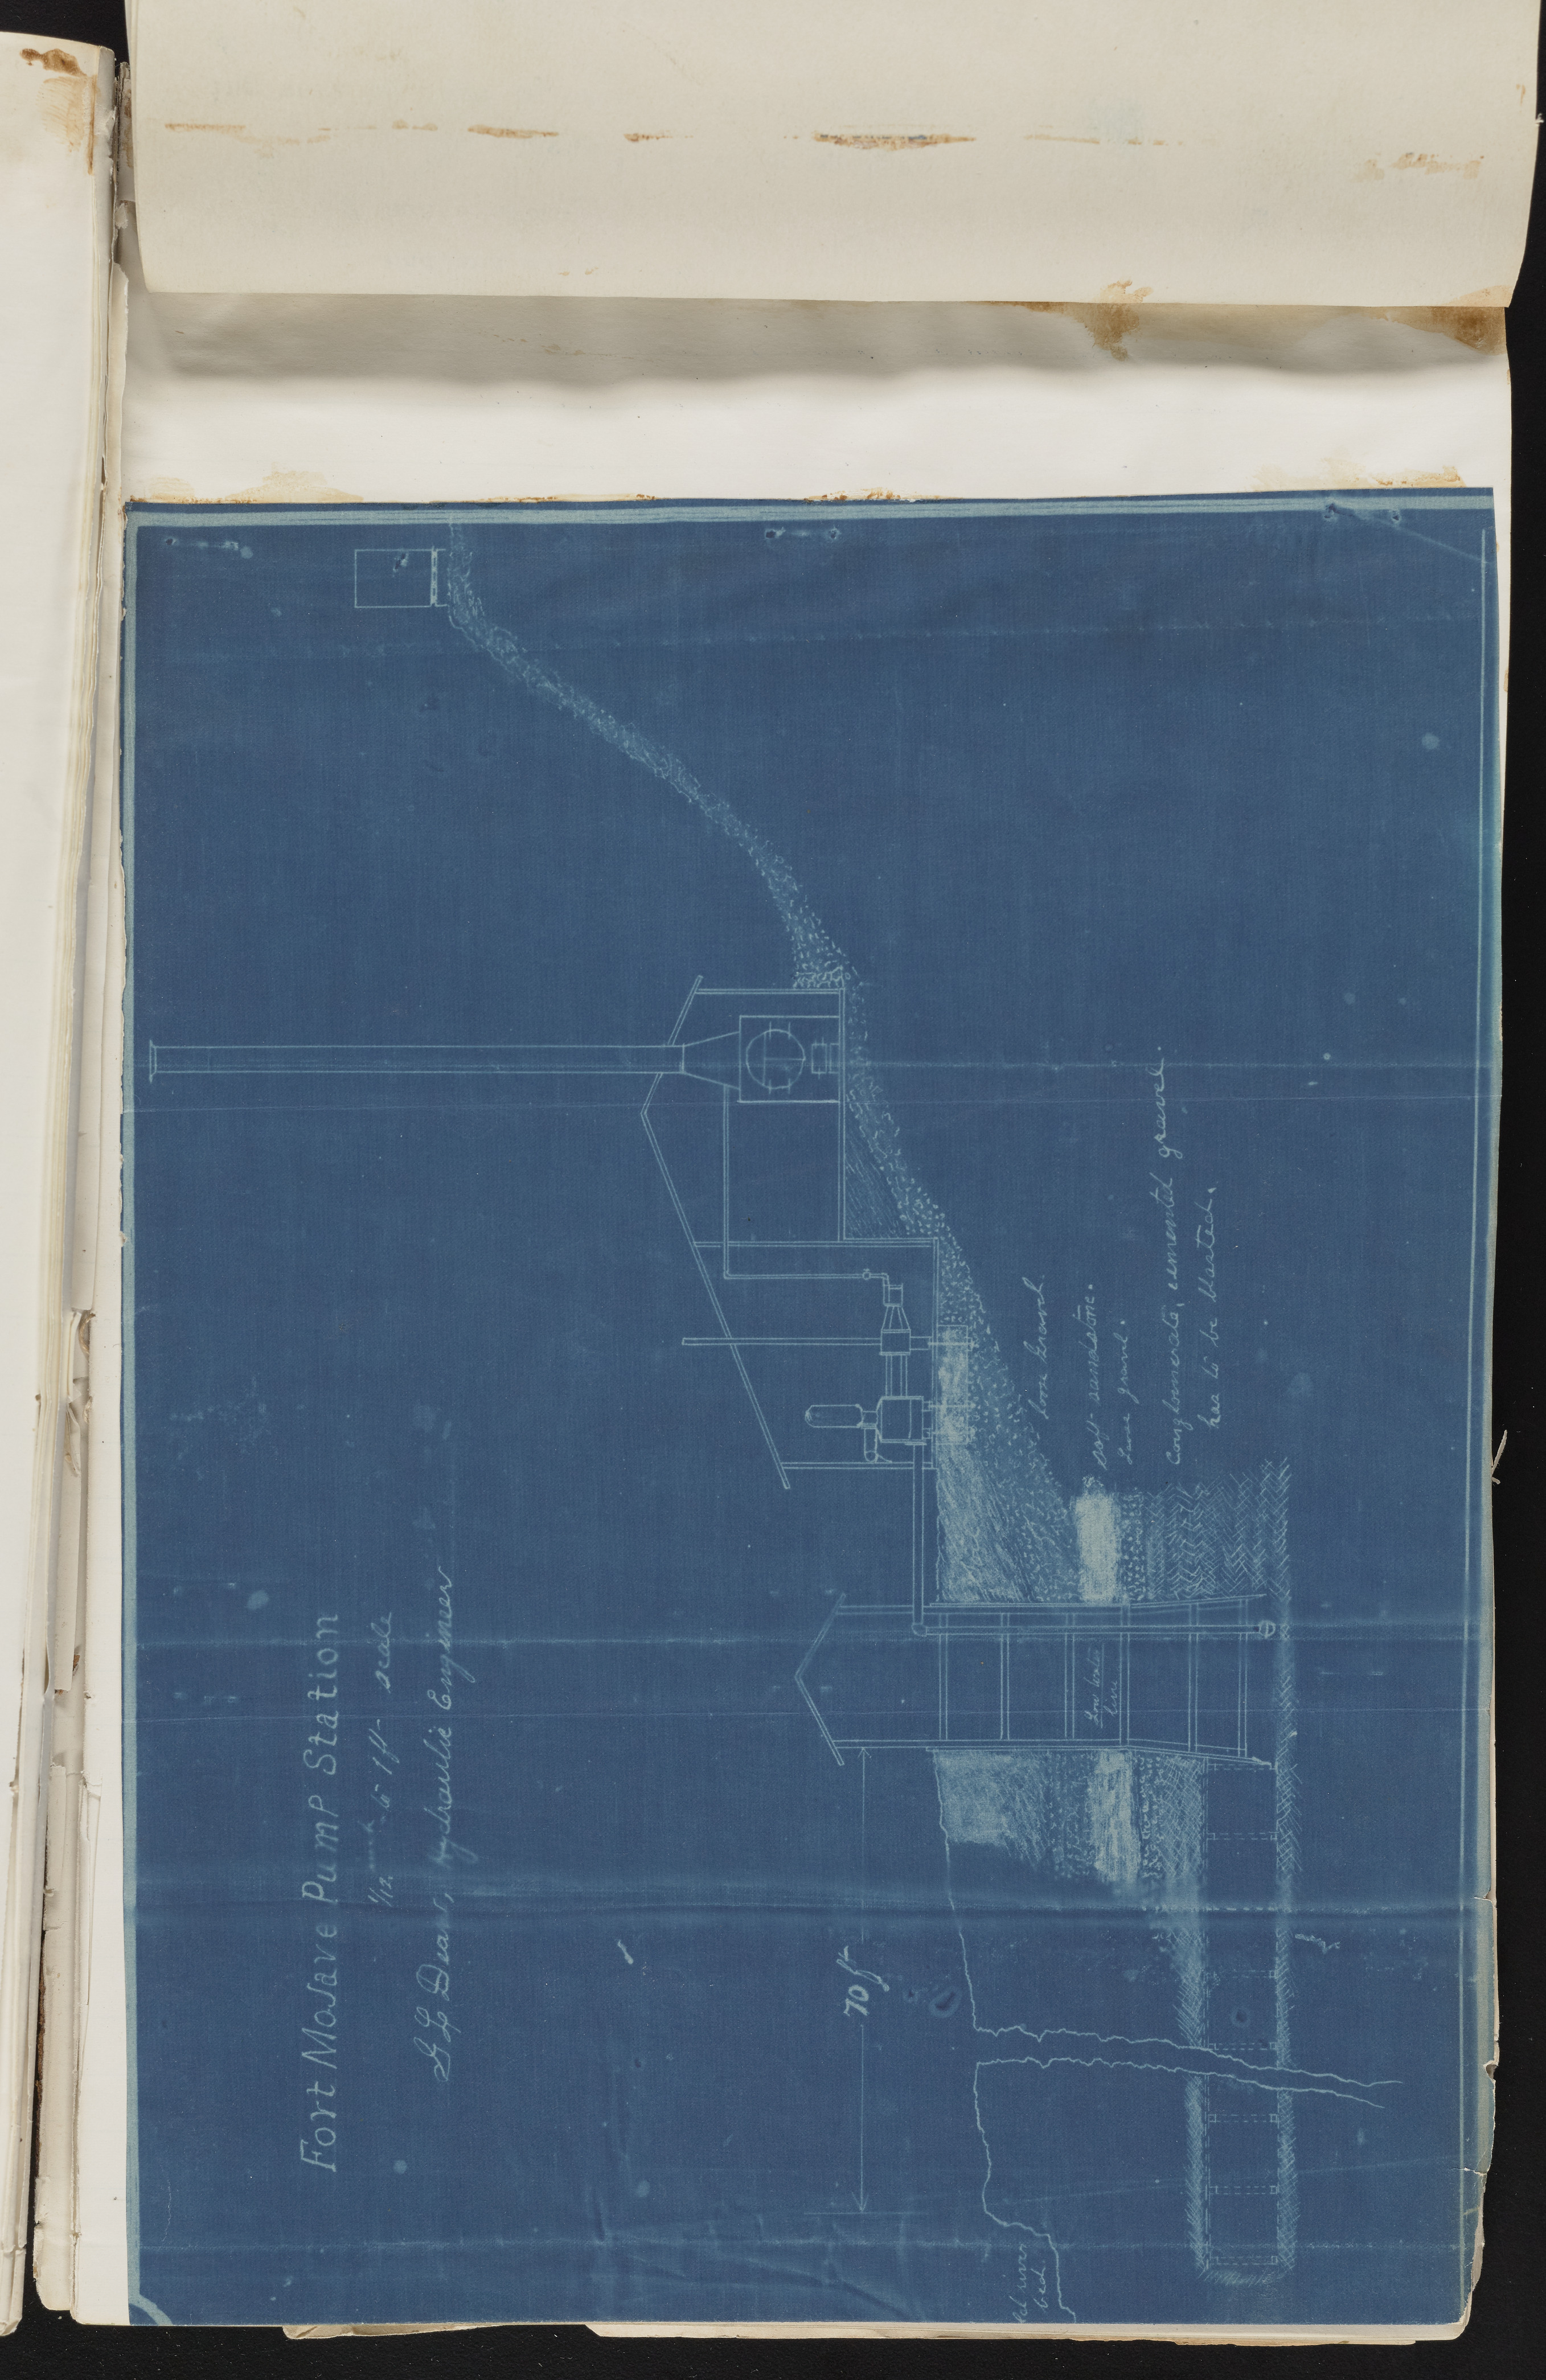 Fort Mojave Industrial School correspondence and a blueprint design of the Fort Mojave Pump Station, Washington (D.C.), 1891-1893, snv002595-76